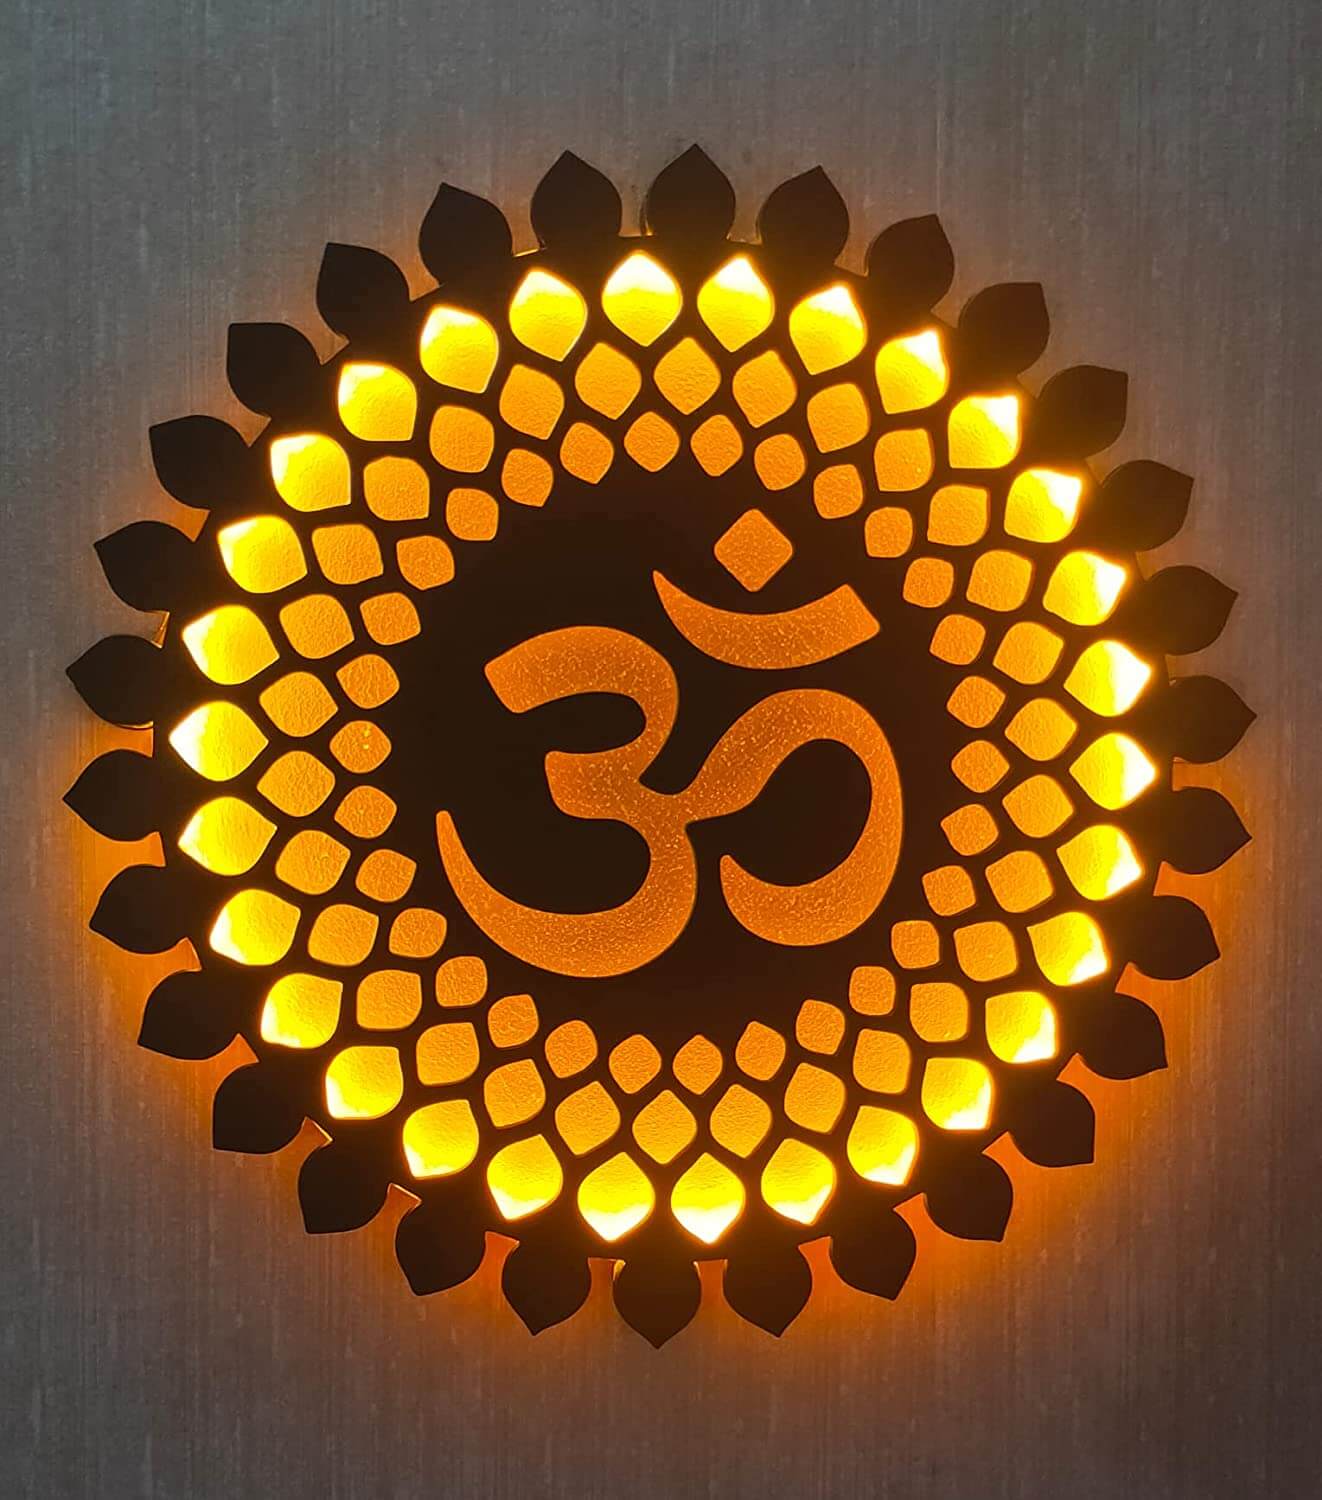 OM Mandala Wall Decor with Back LED (18 x 18 Inch, Color: Brown & Golden Yellow) Mangal Fashions | Indian Home Decor and Craft